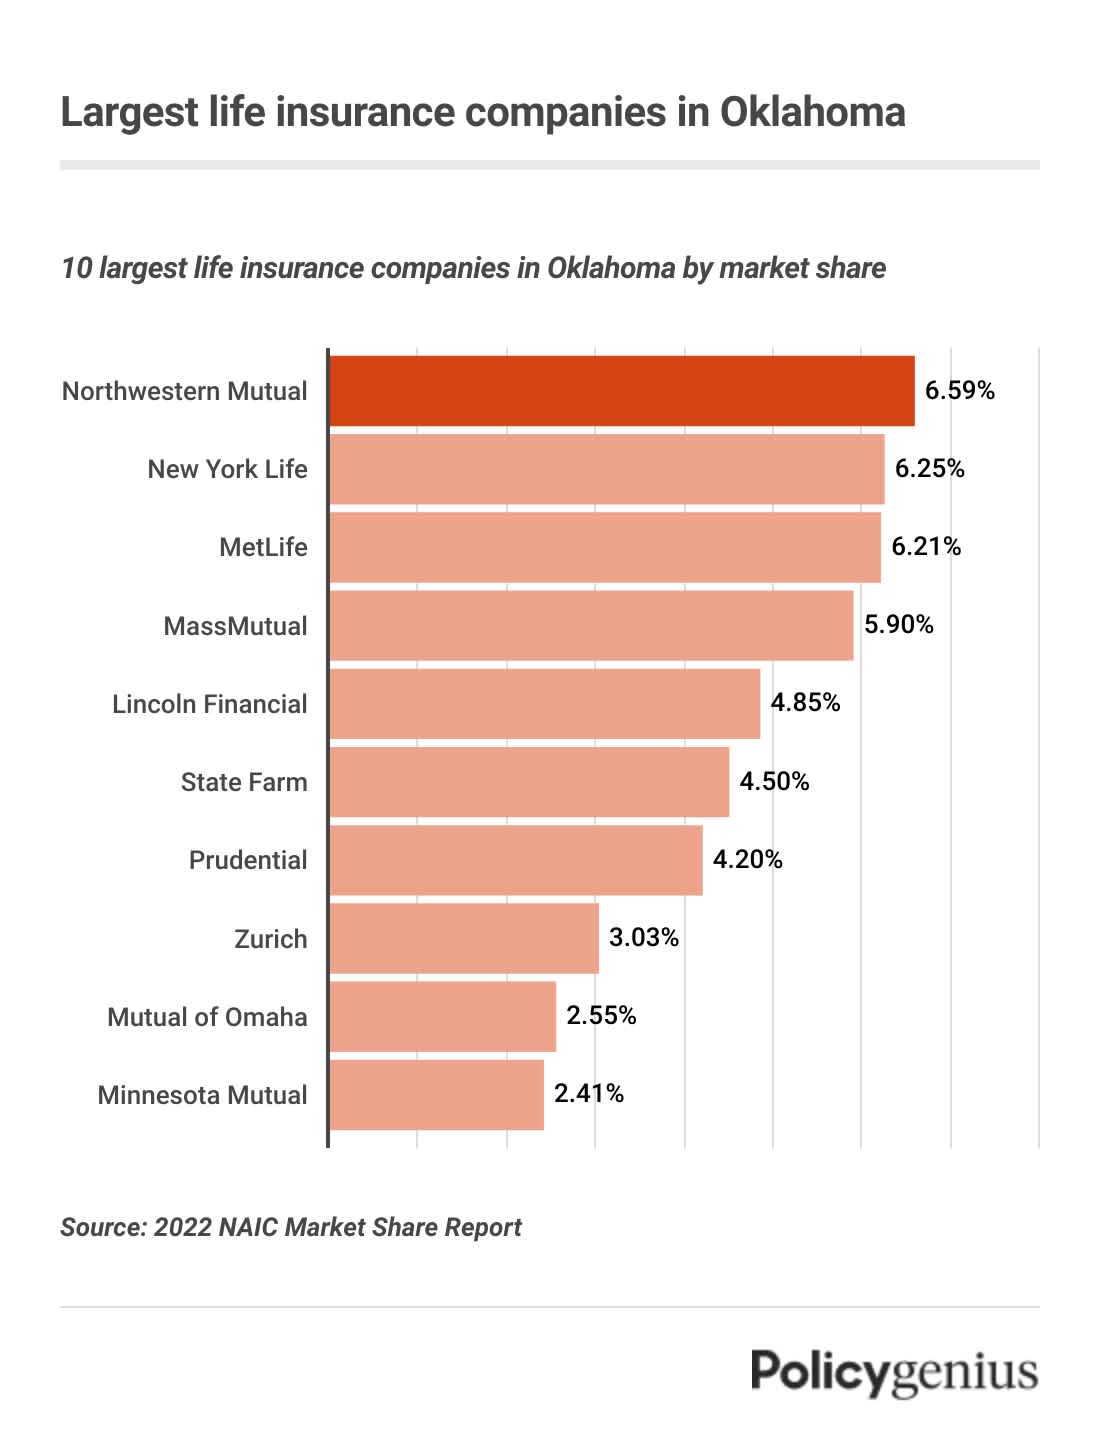 A bar graph showing the largest life insurance companies in Oklahoma by market share. North Western Mutual is the largest company.